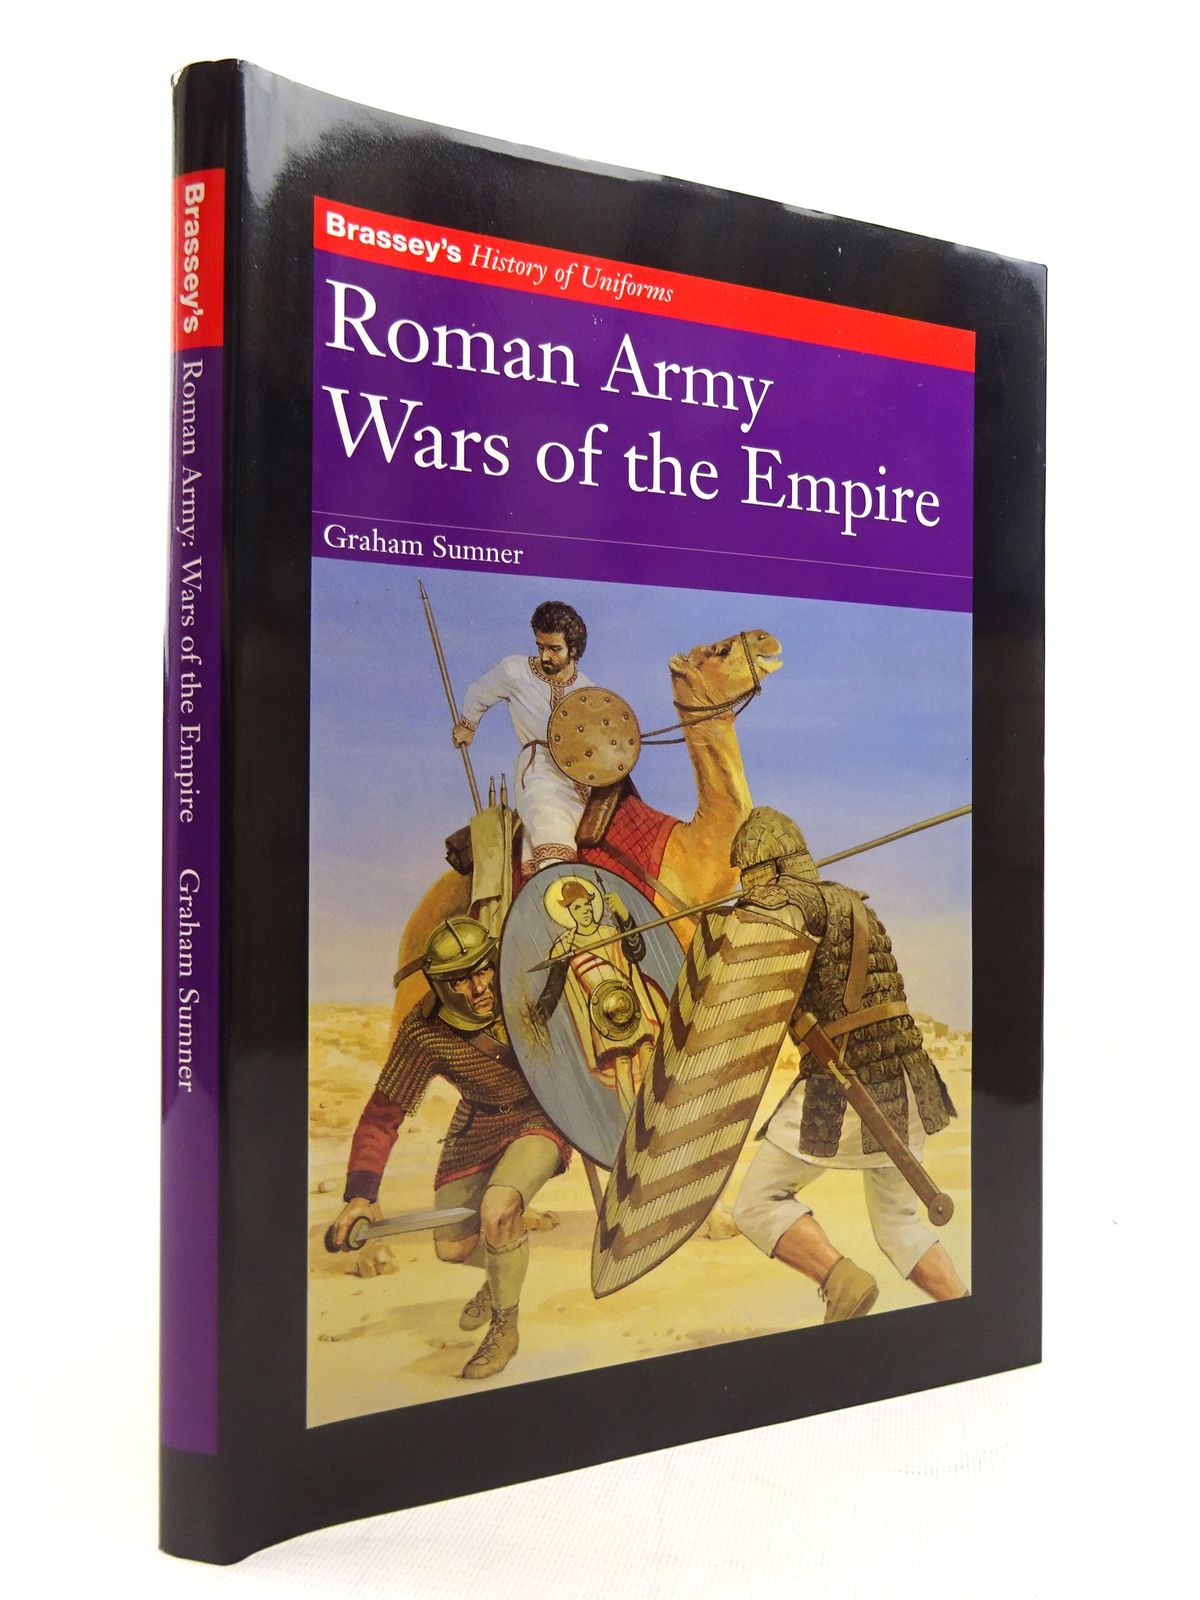 Photo of ROMAN ARMY WARS OF THE EMPIRE written by Sumner, Graham illustrated by Turner, Graham published by Brassey's (STOCK CODE: 1816015)  for sale by Stella & Rose's Books